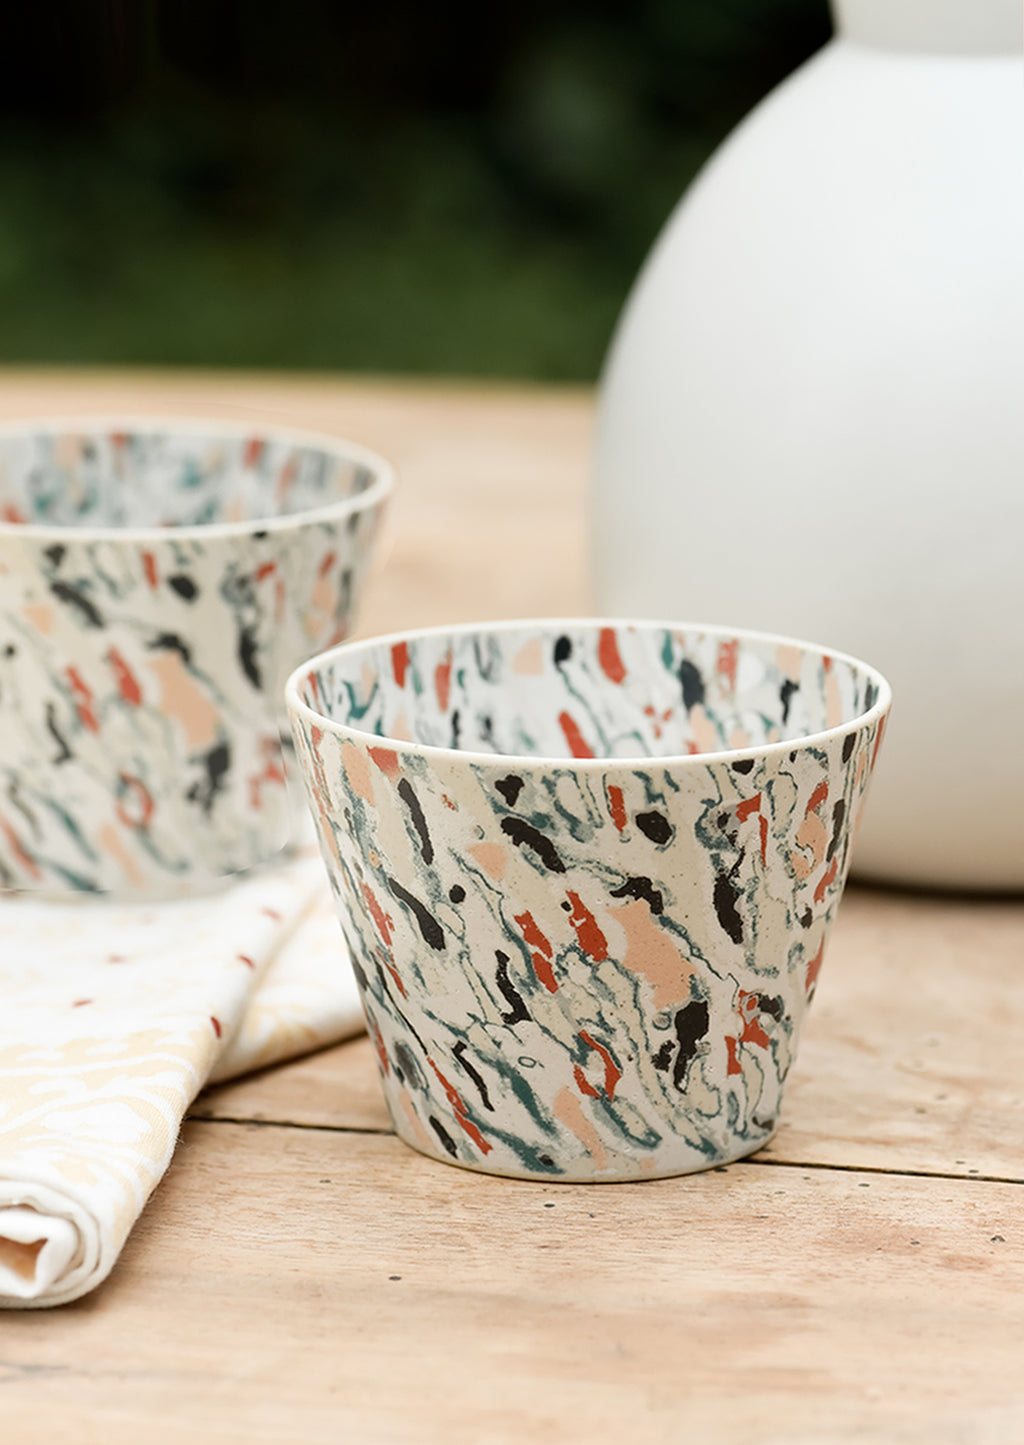 2: Marbleized porcelain cups on a table.